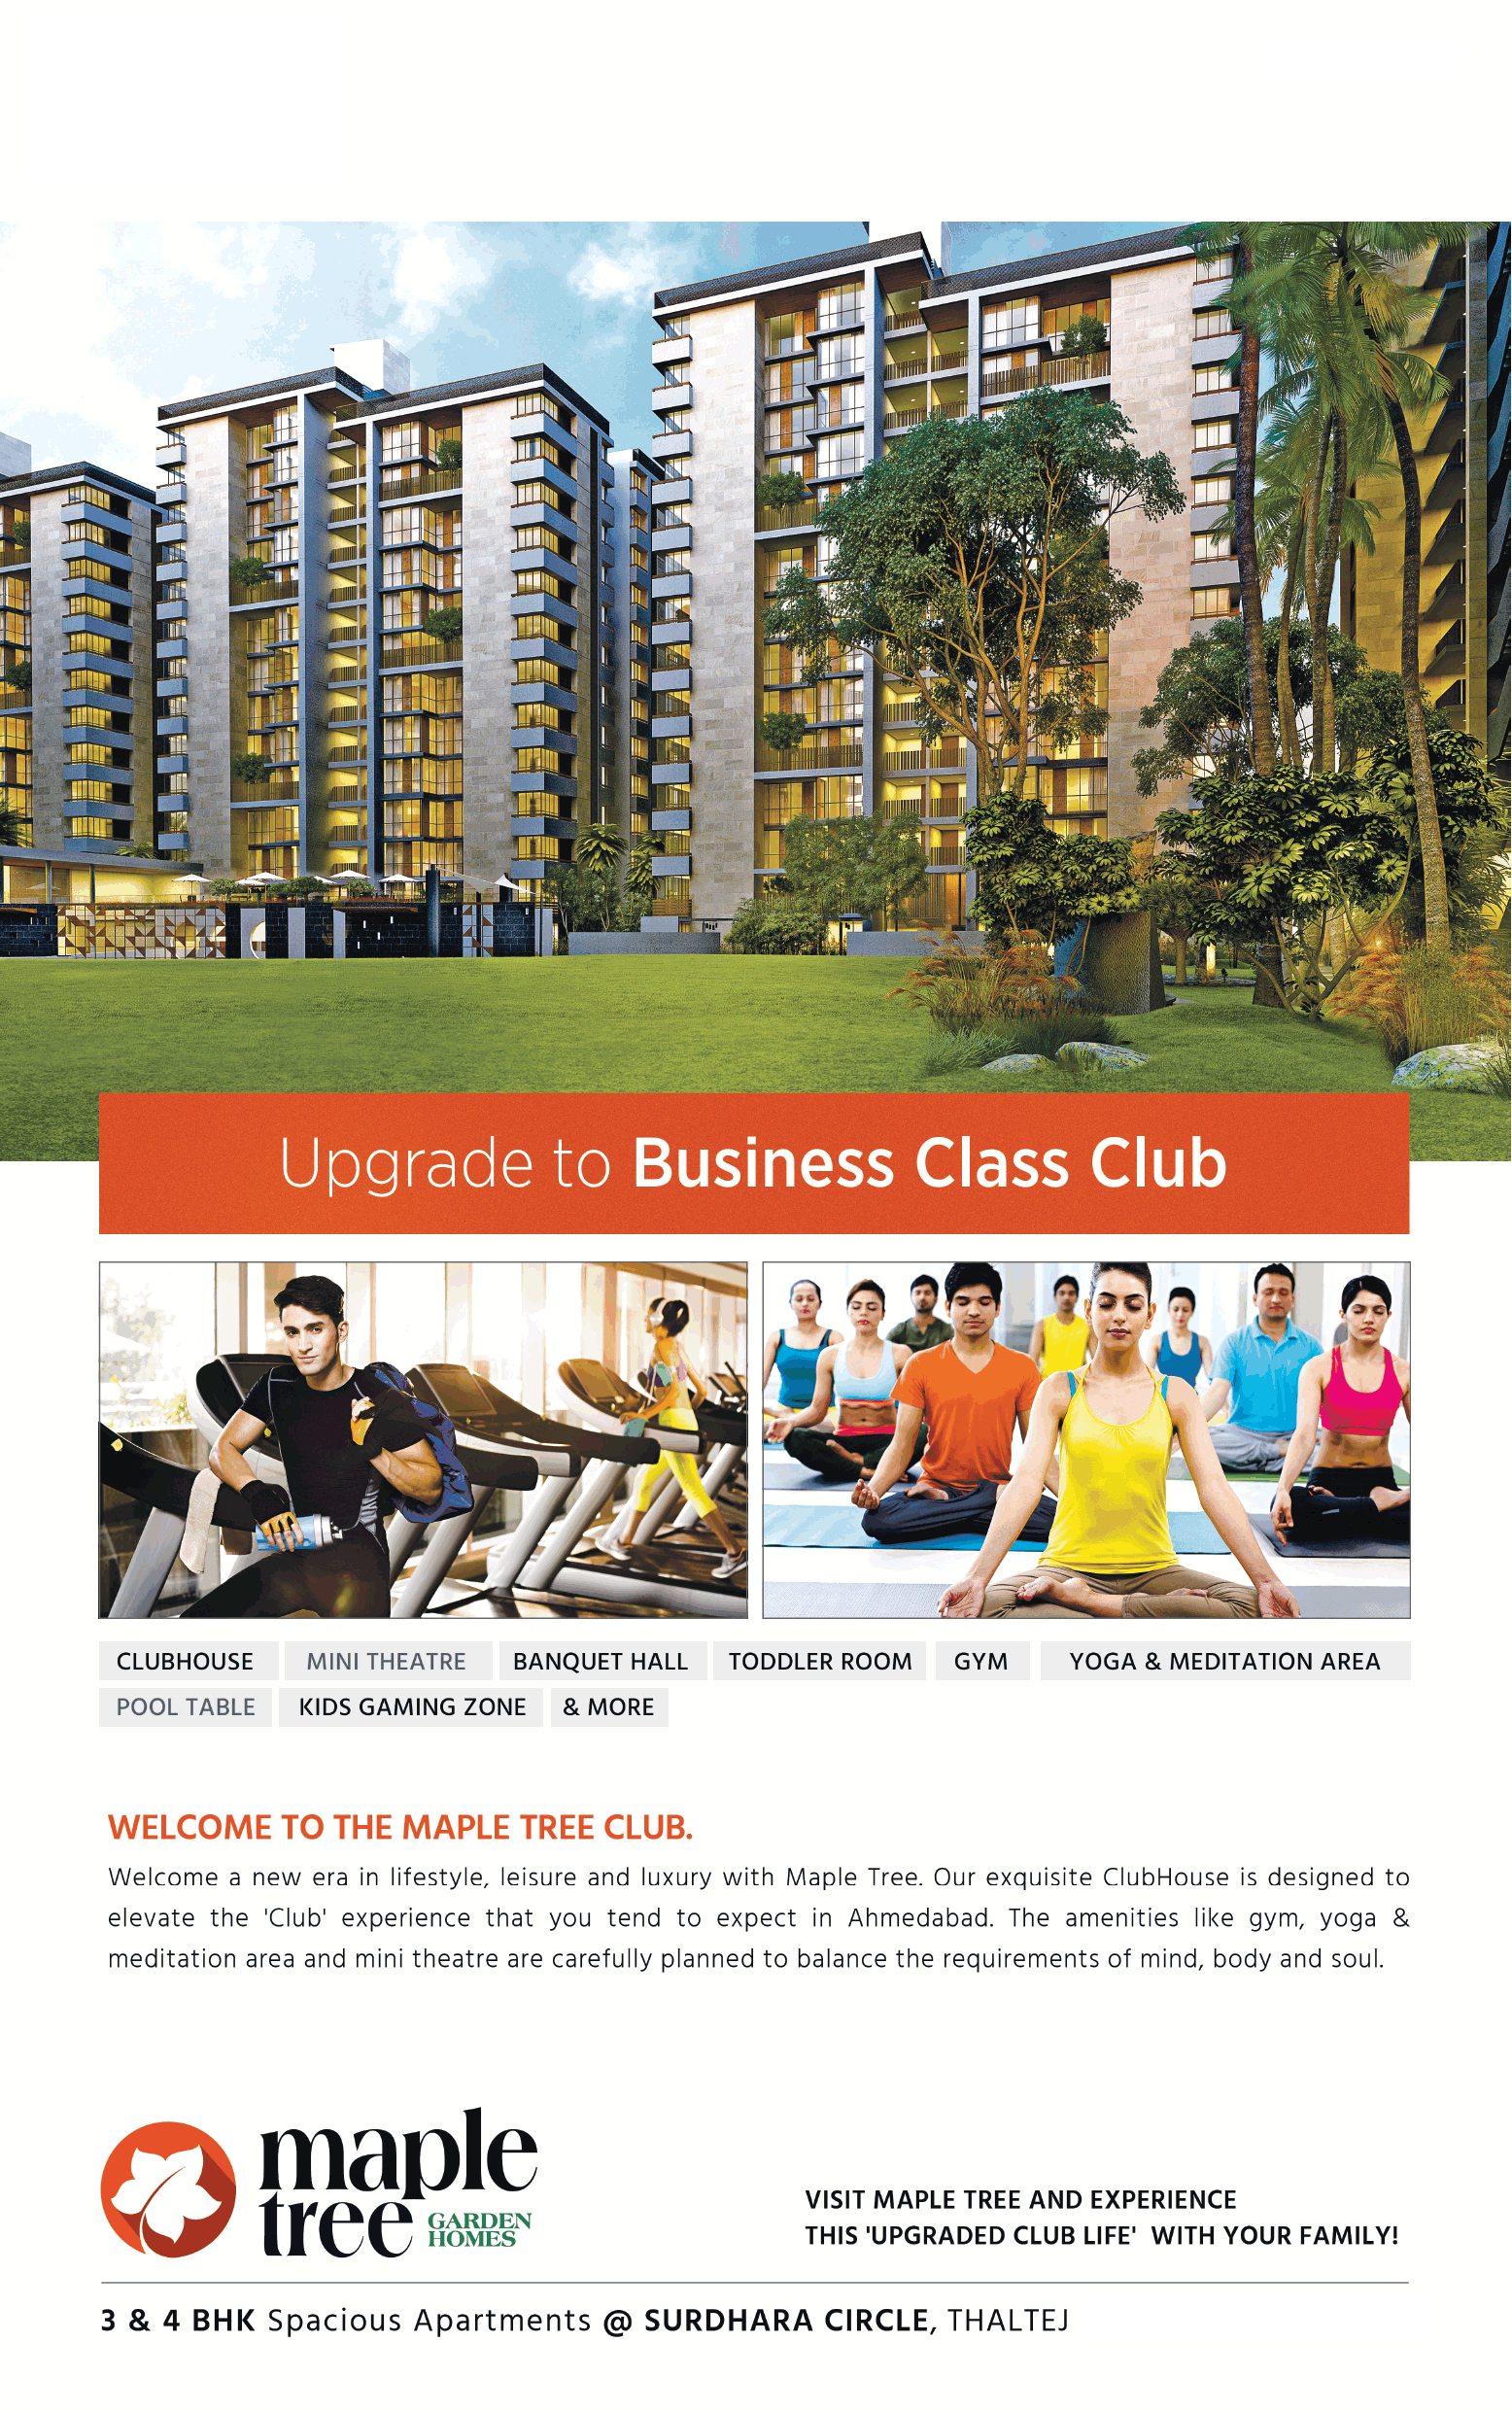 Avail a new era lifestyle, leisure & luxury with Ganesh Maple Tree in Ahmedabad Update